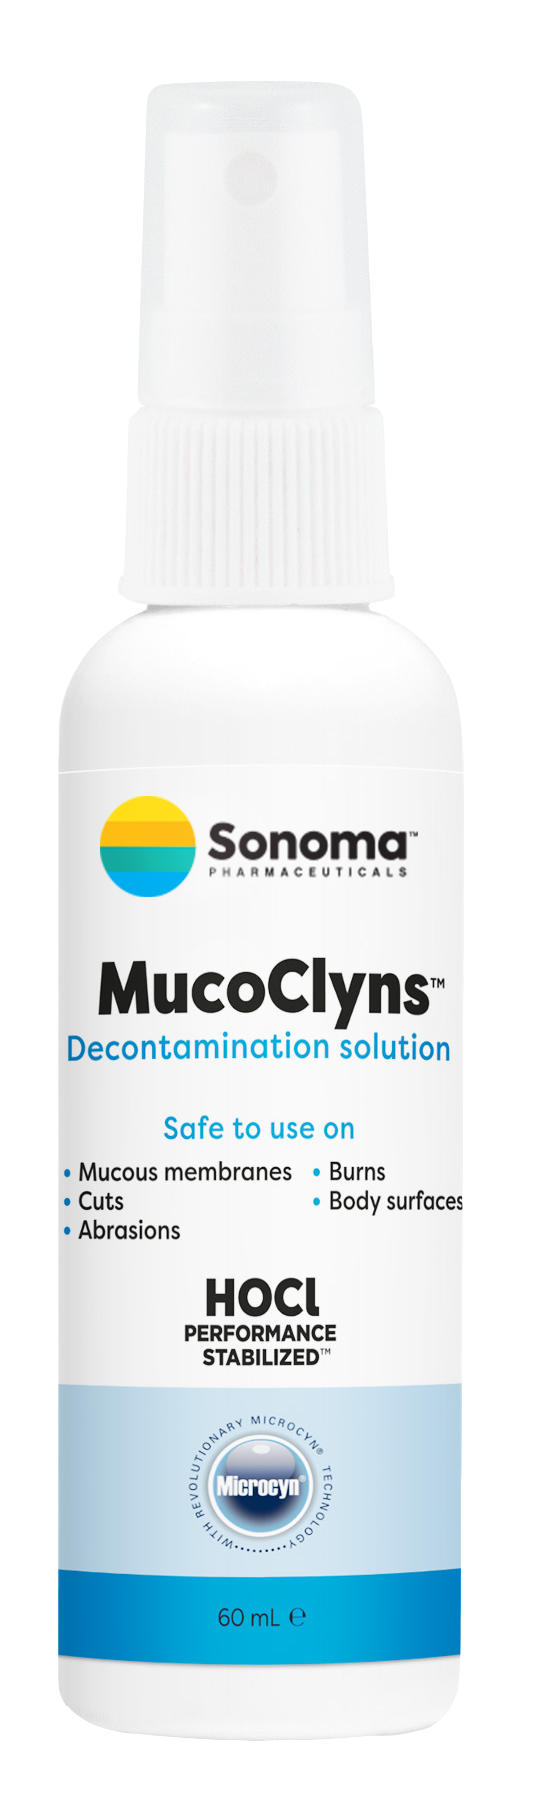 Mucoclyns Personal Decontamination